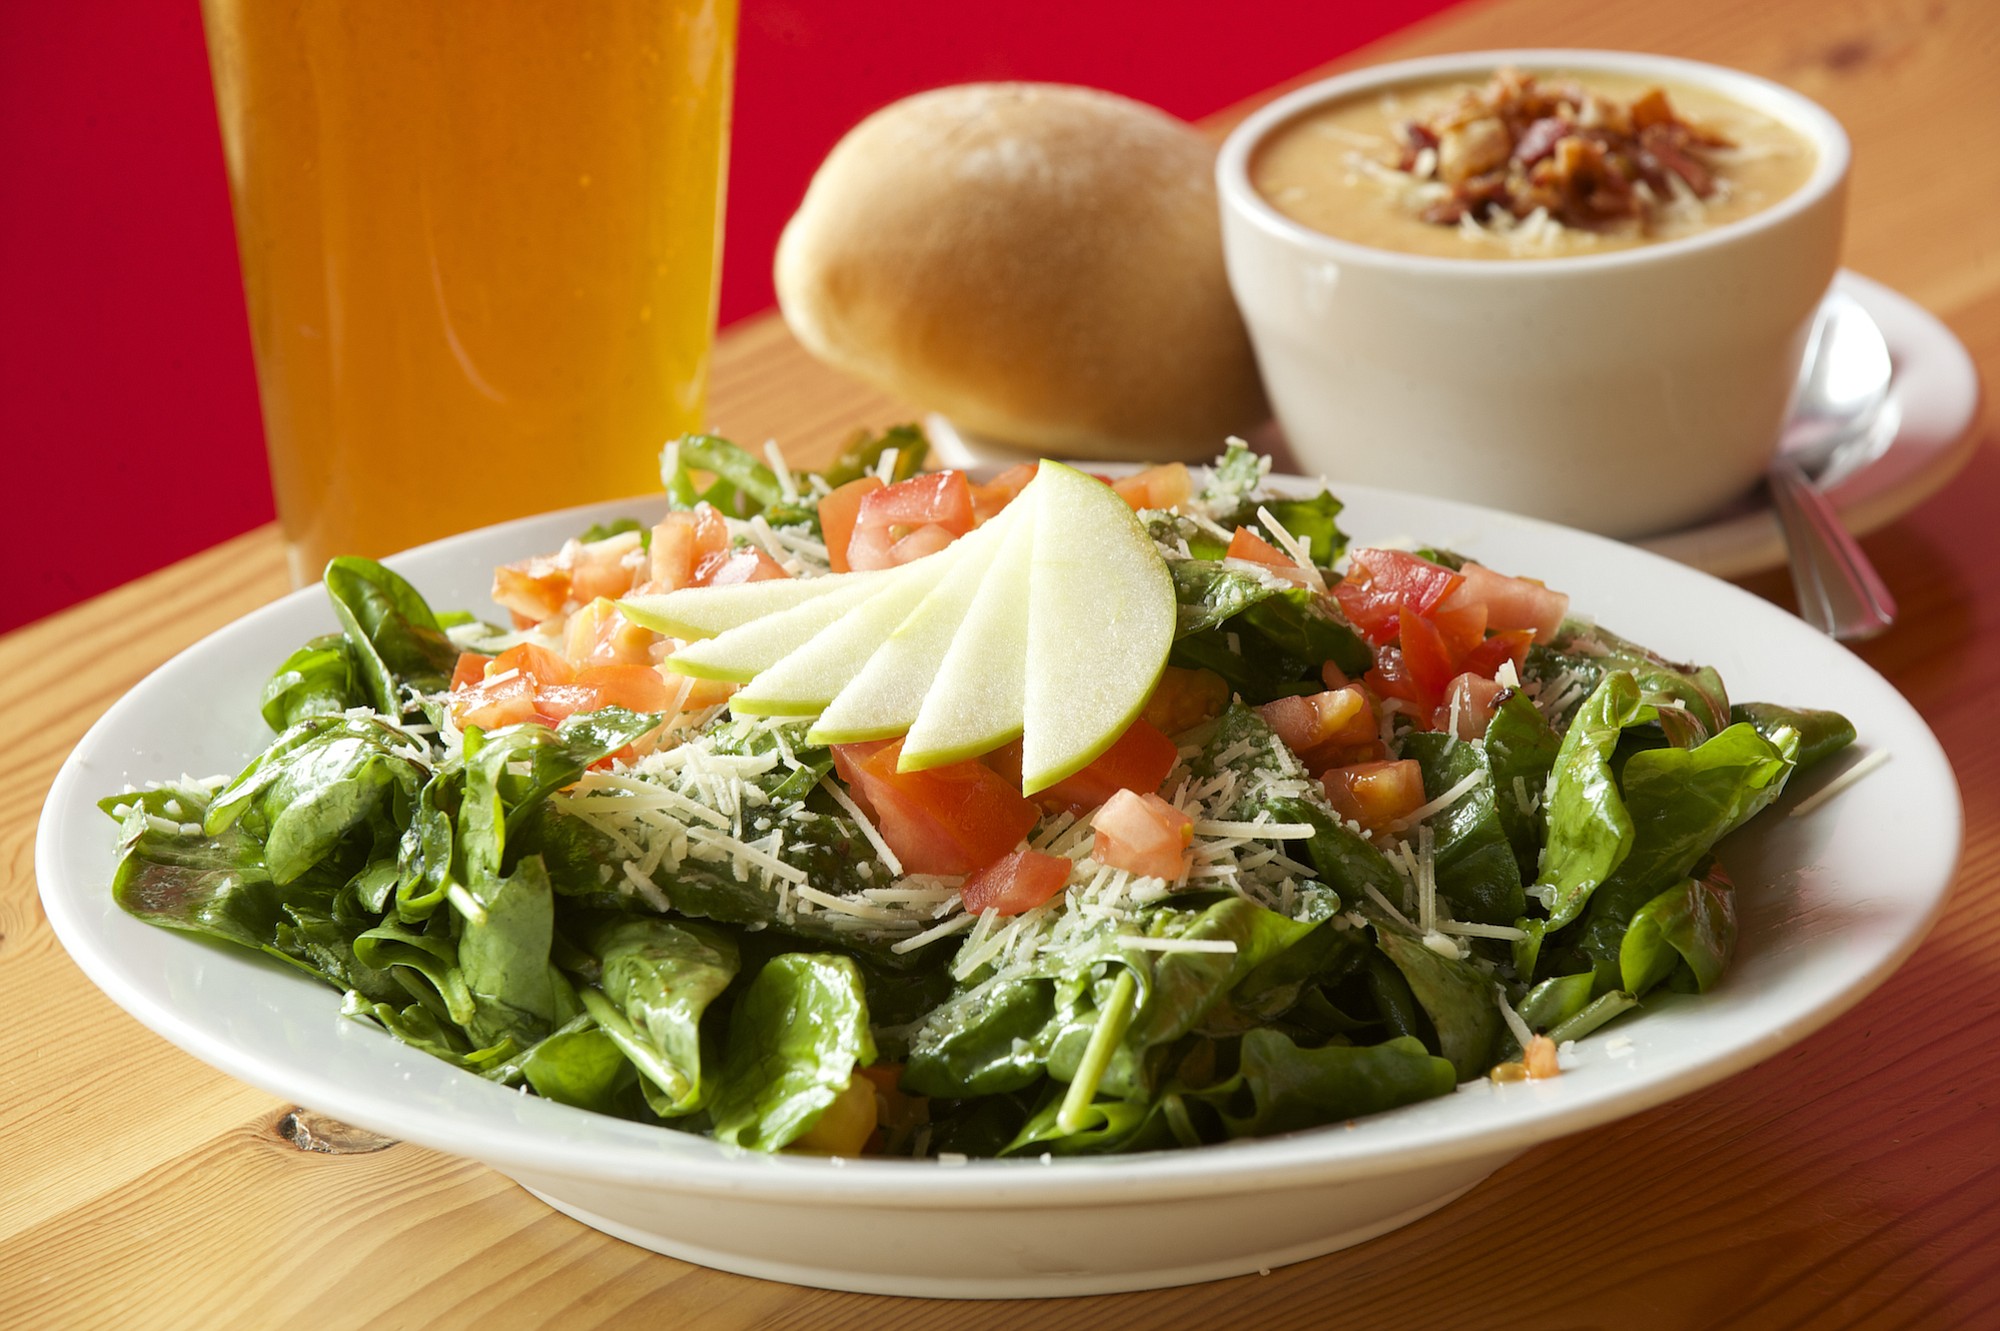 Spinach salad and beer cheese soup are amon the menu options at Amnesia Brewing in Washougal.